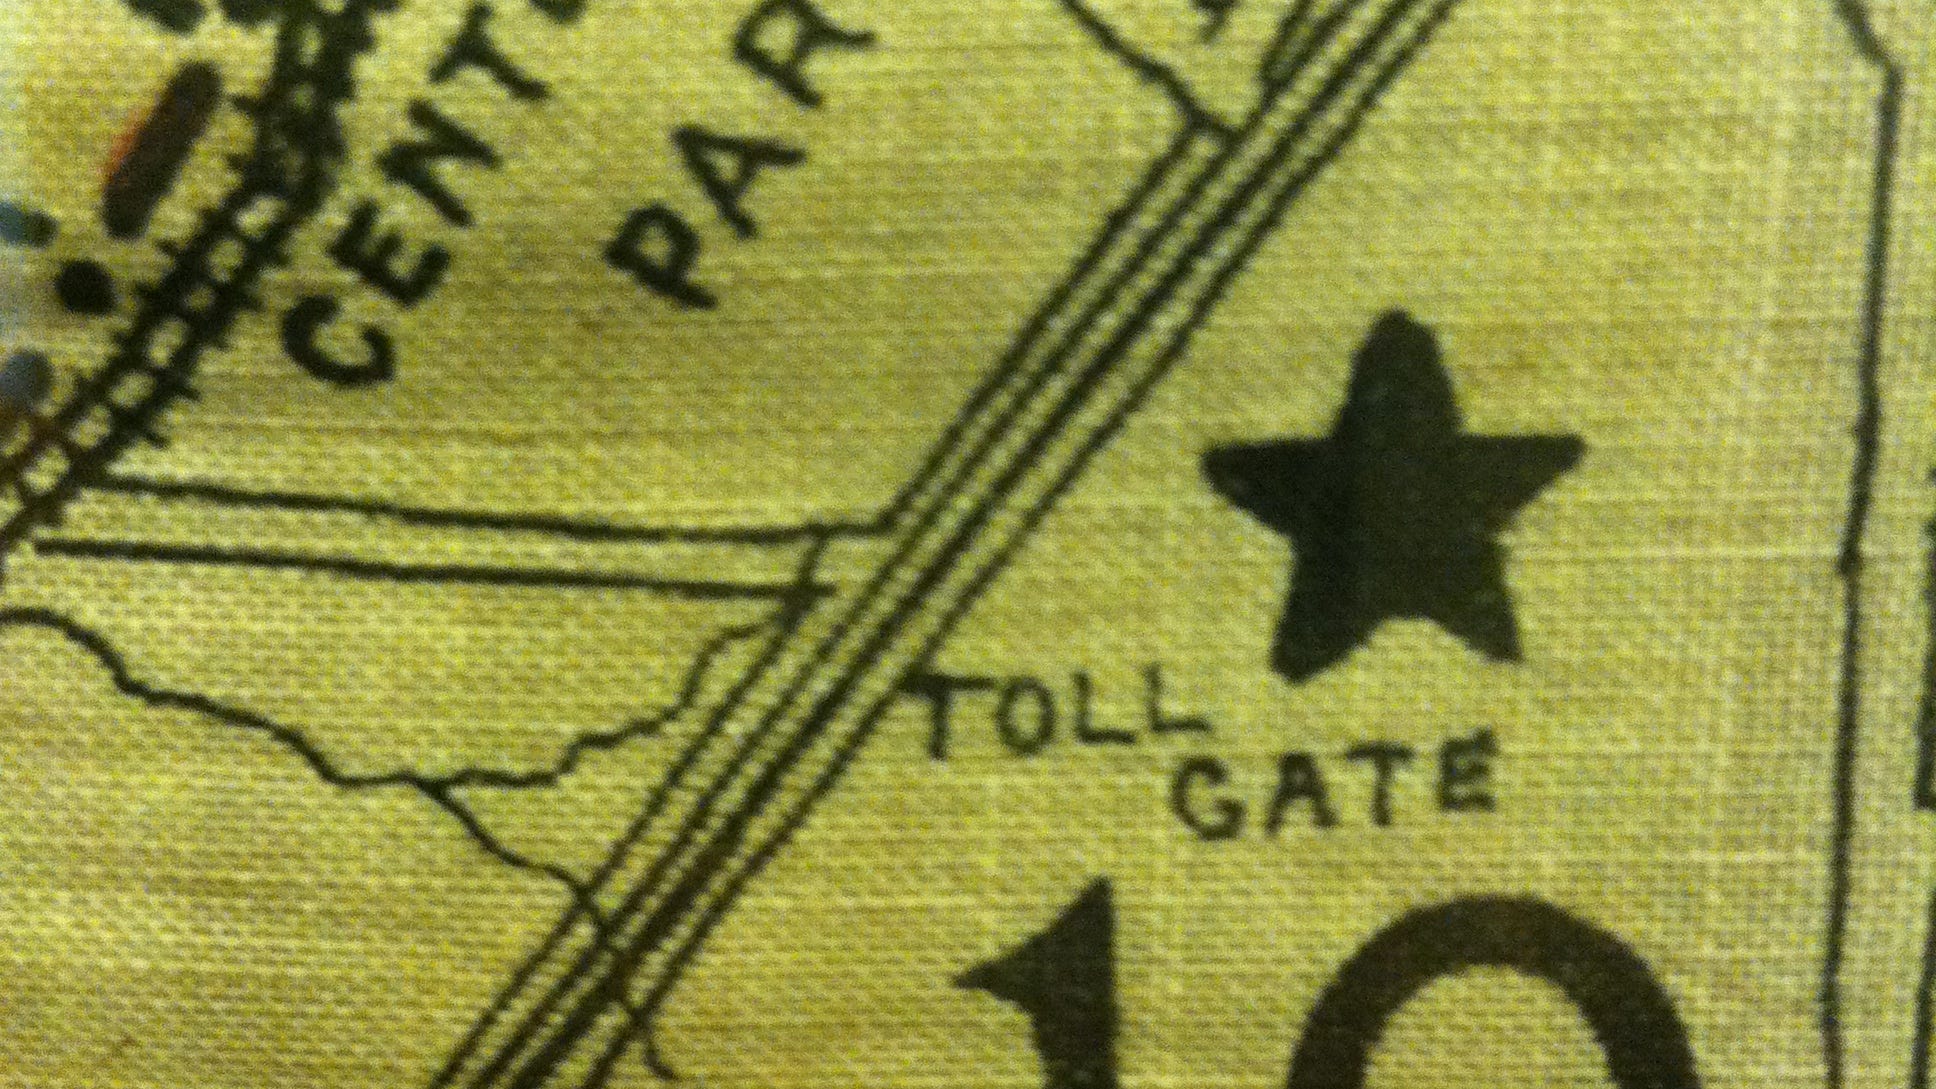 Mapdetail Tollgate ?width=1936&height=1089&fit=crop&format=pjpg&auto=webp